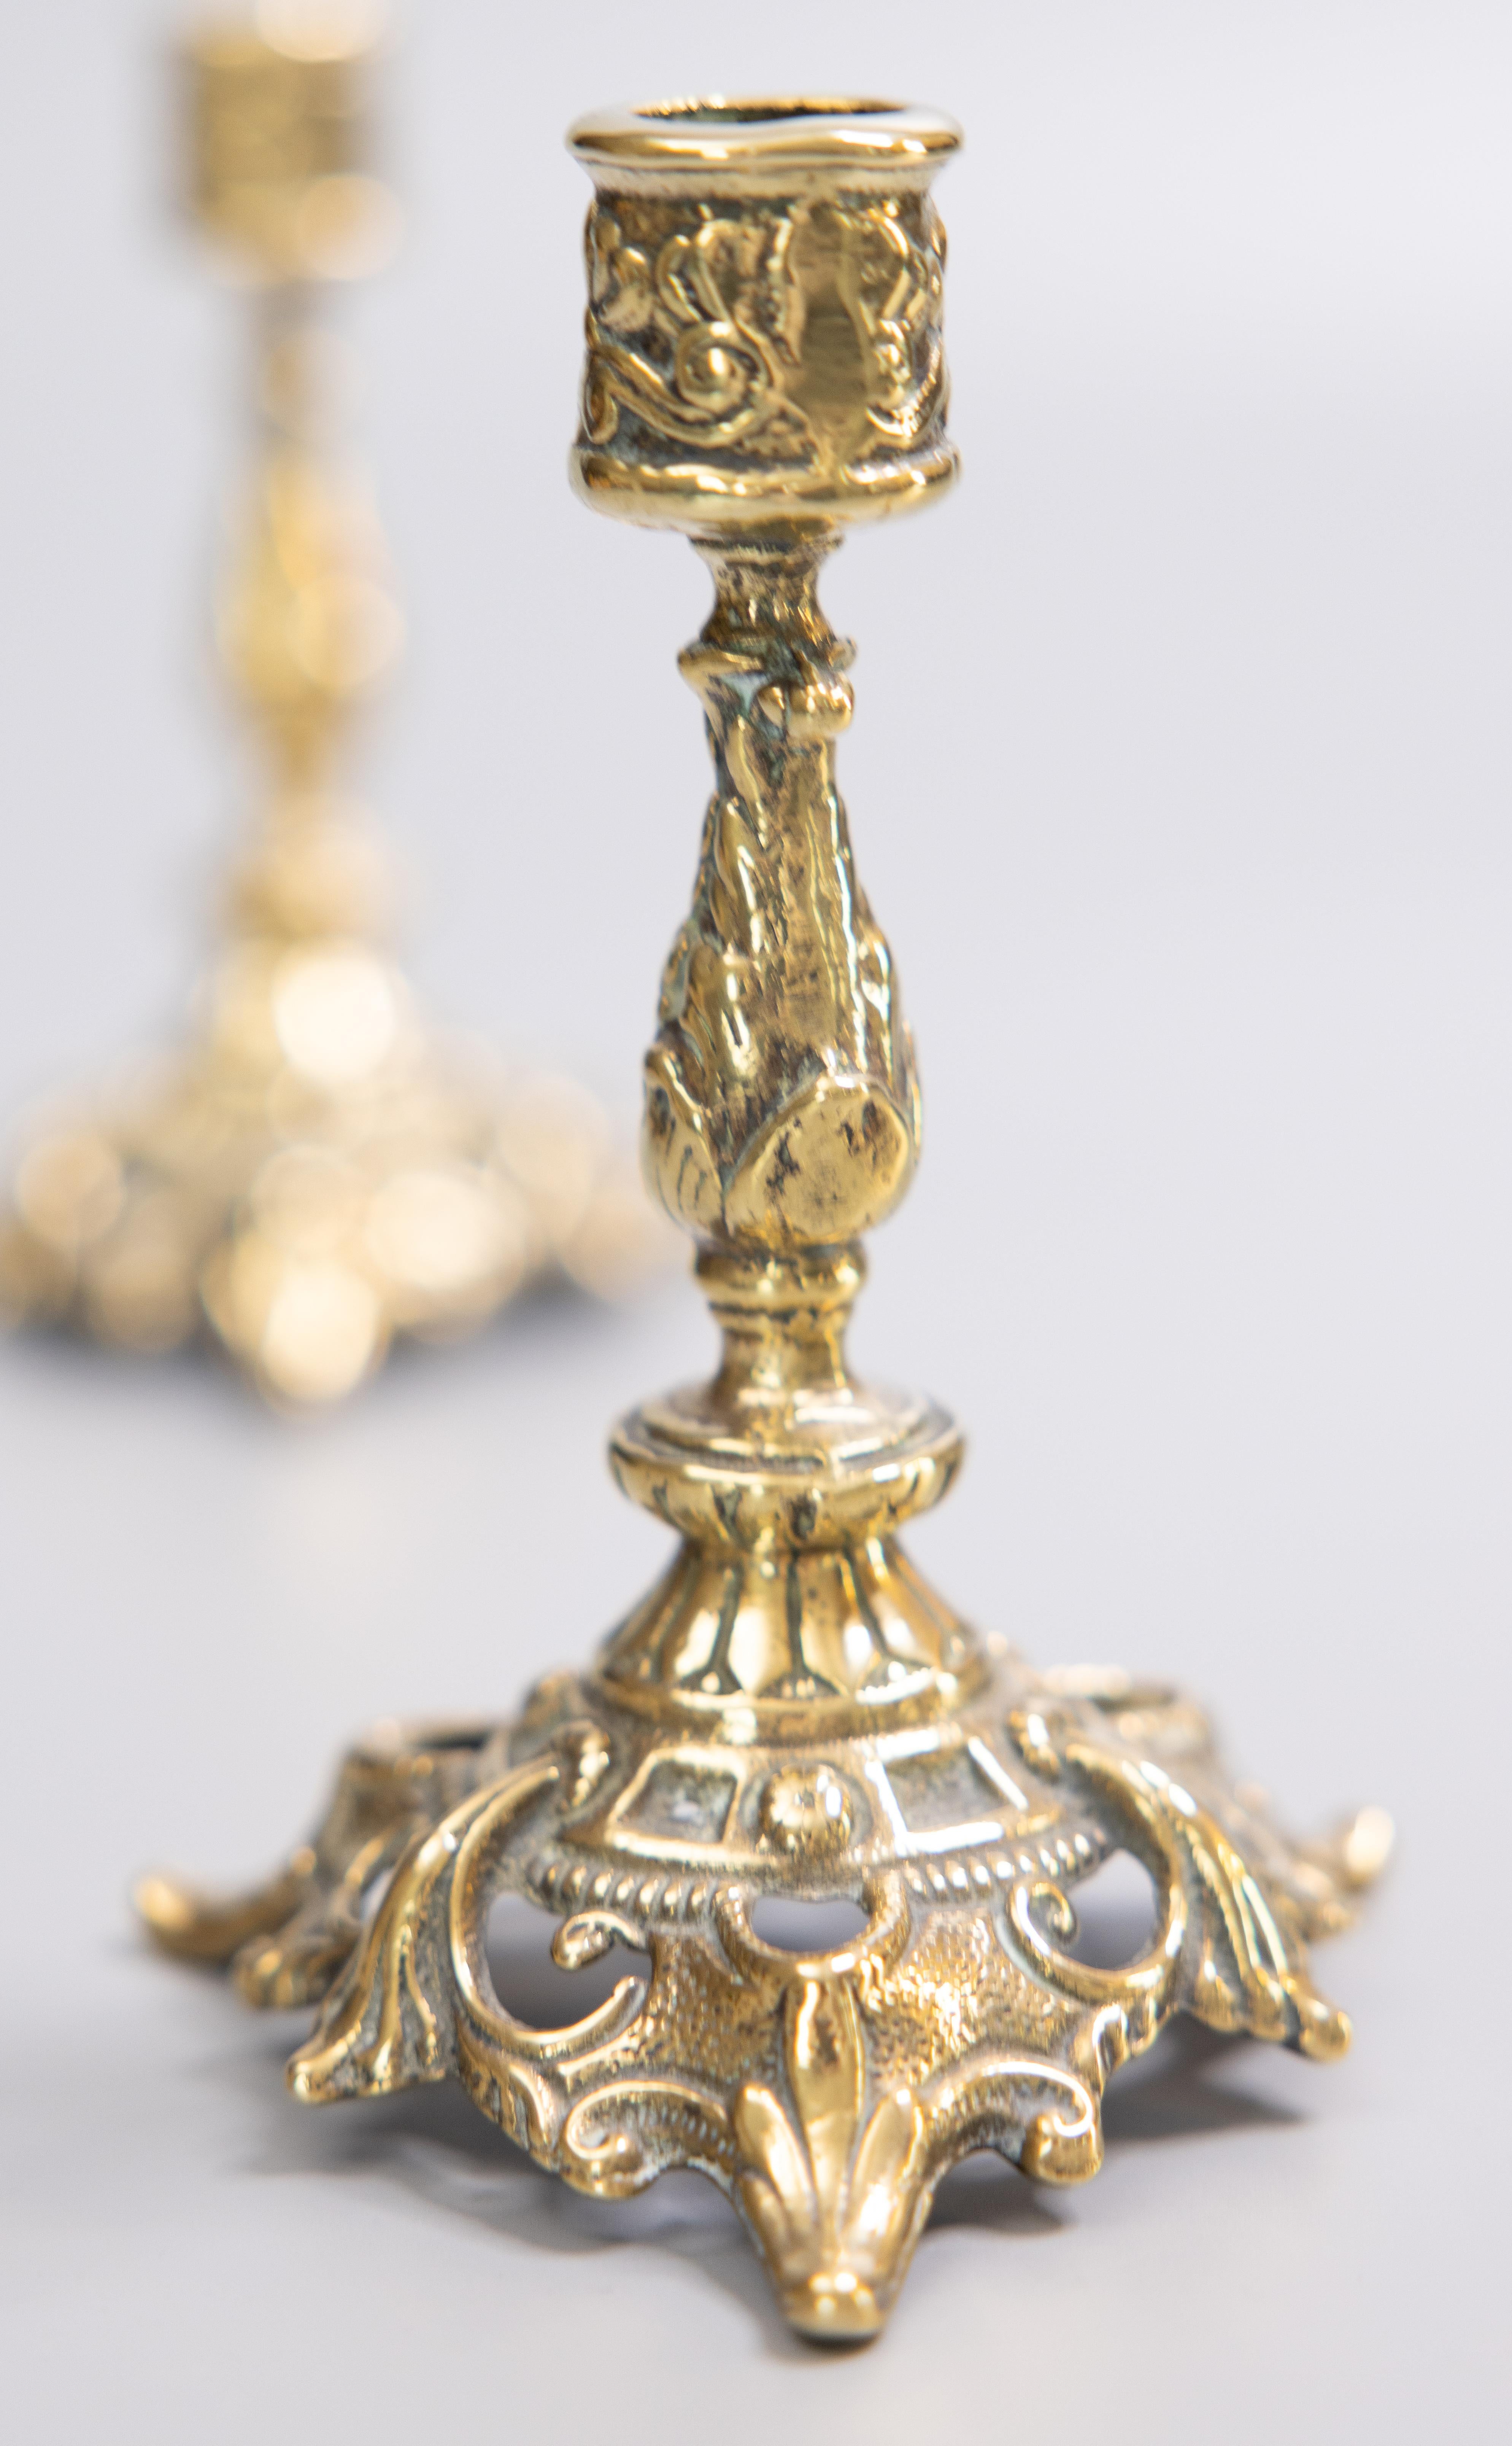 A fine pair of antique English Edwardian cast brass candlesticks, circa 1910. The bases are stamped with 